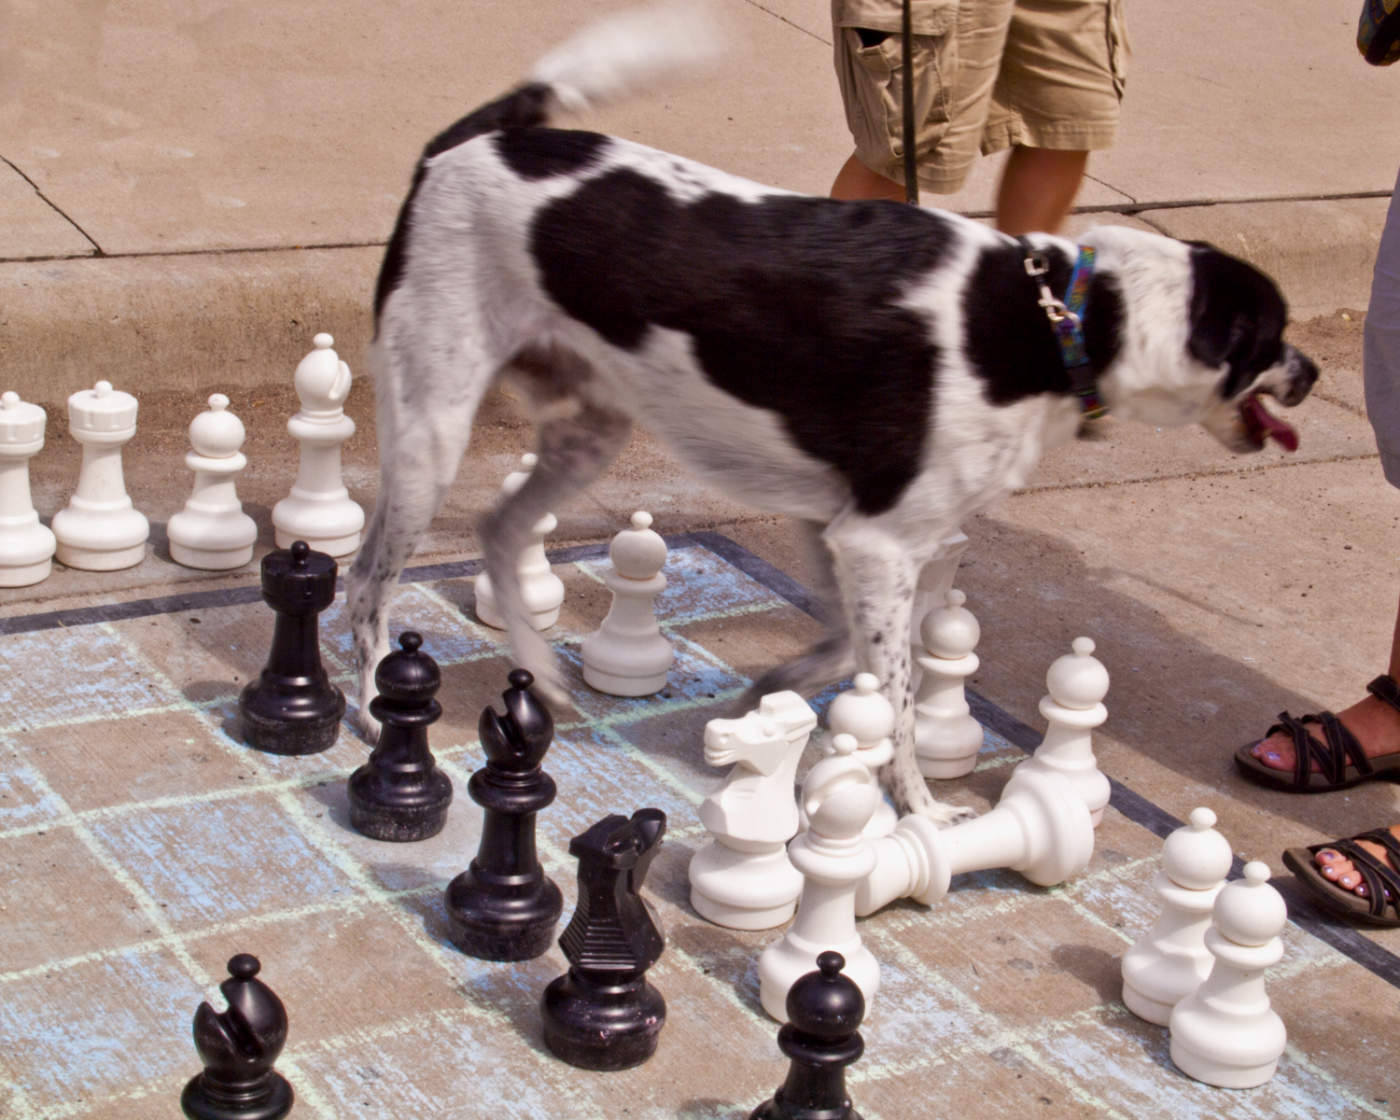 big white and black dog standing on a large chess board with white and black playing pieces